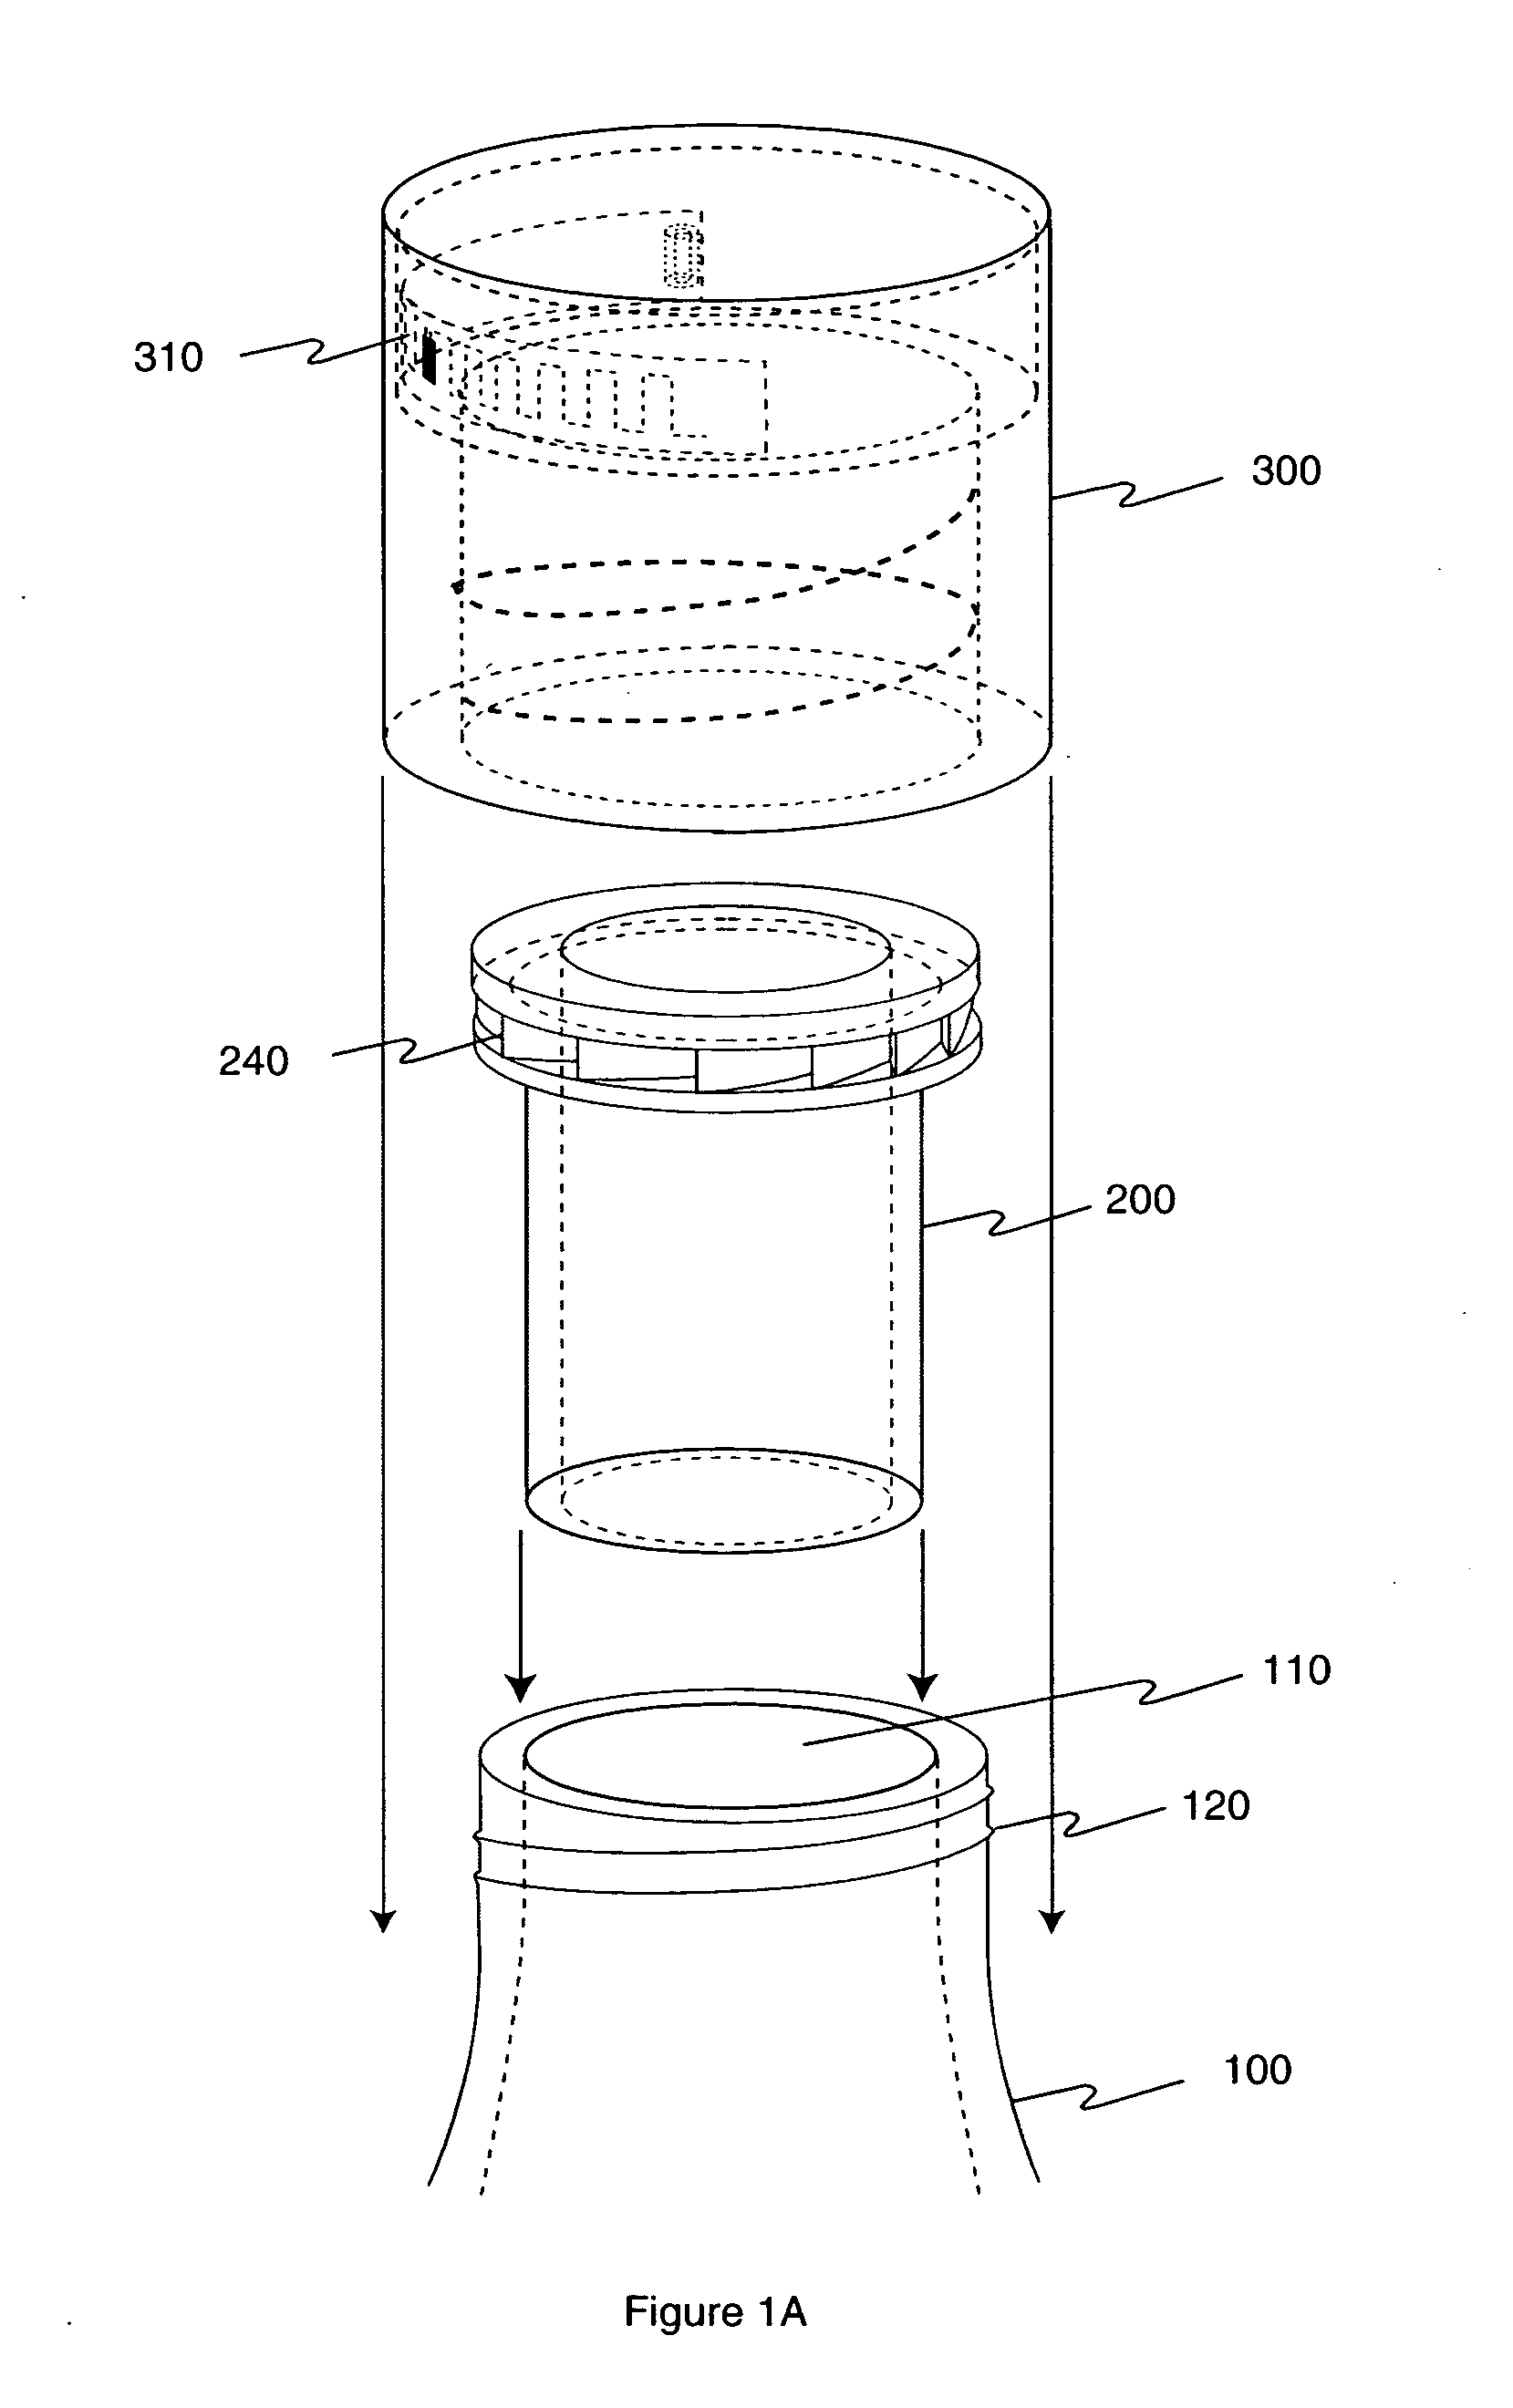 Apparatus for electronically verifying the authenticity of contents within a container